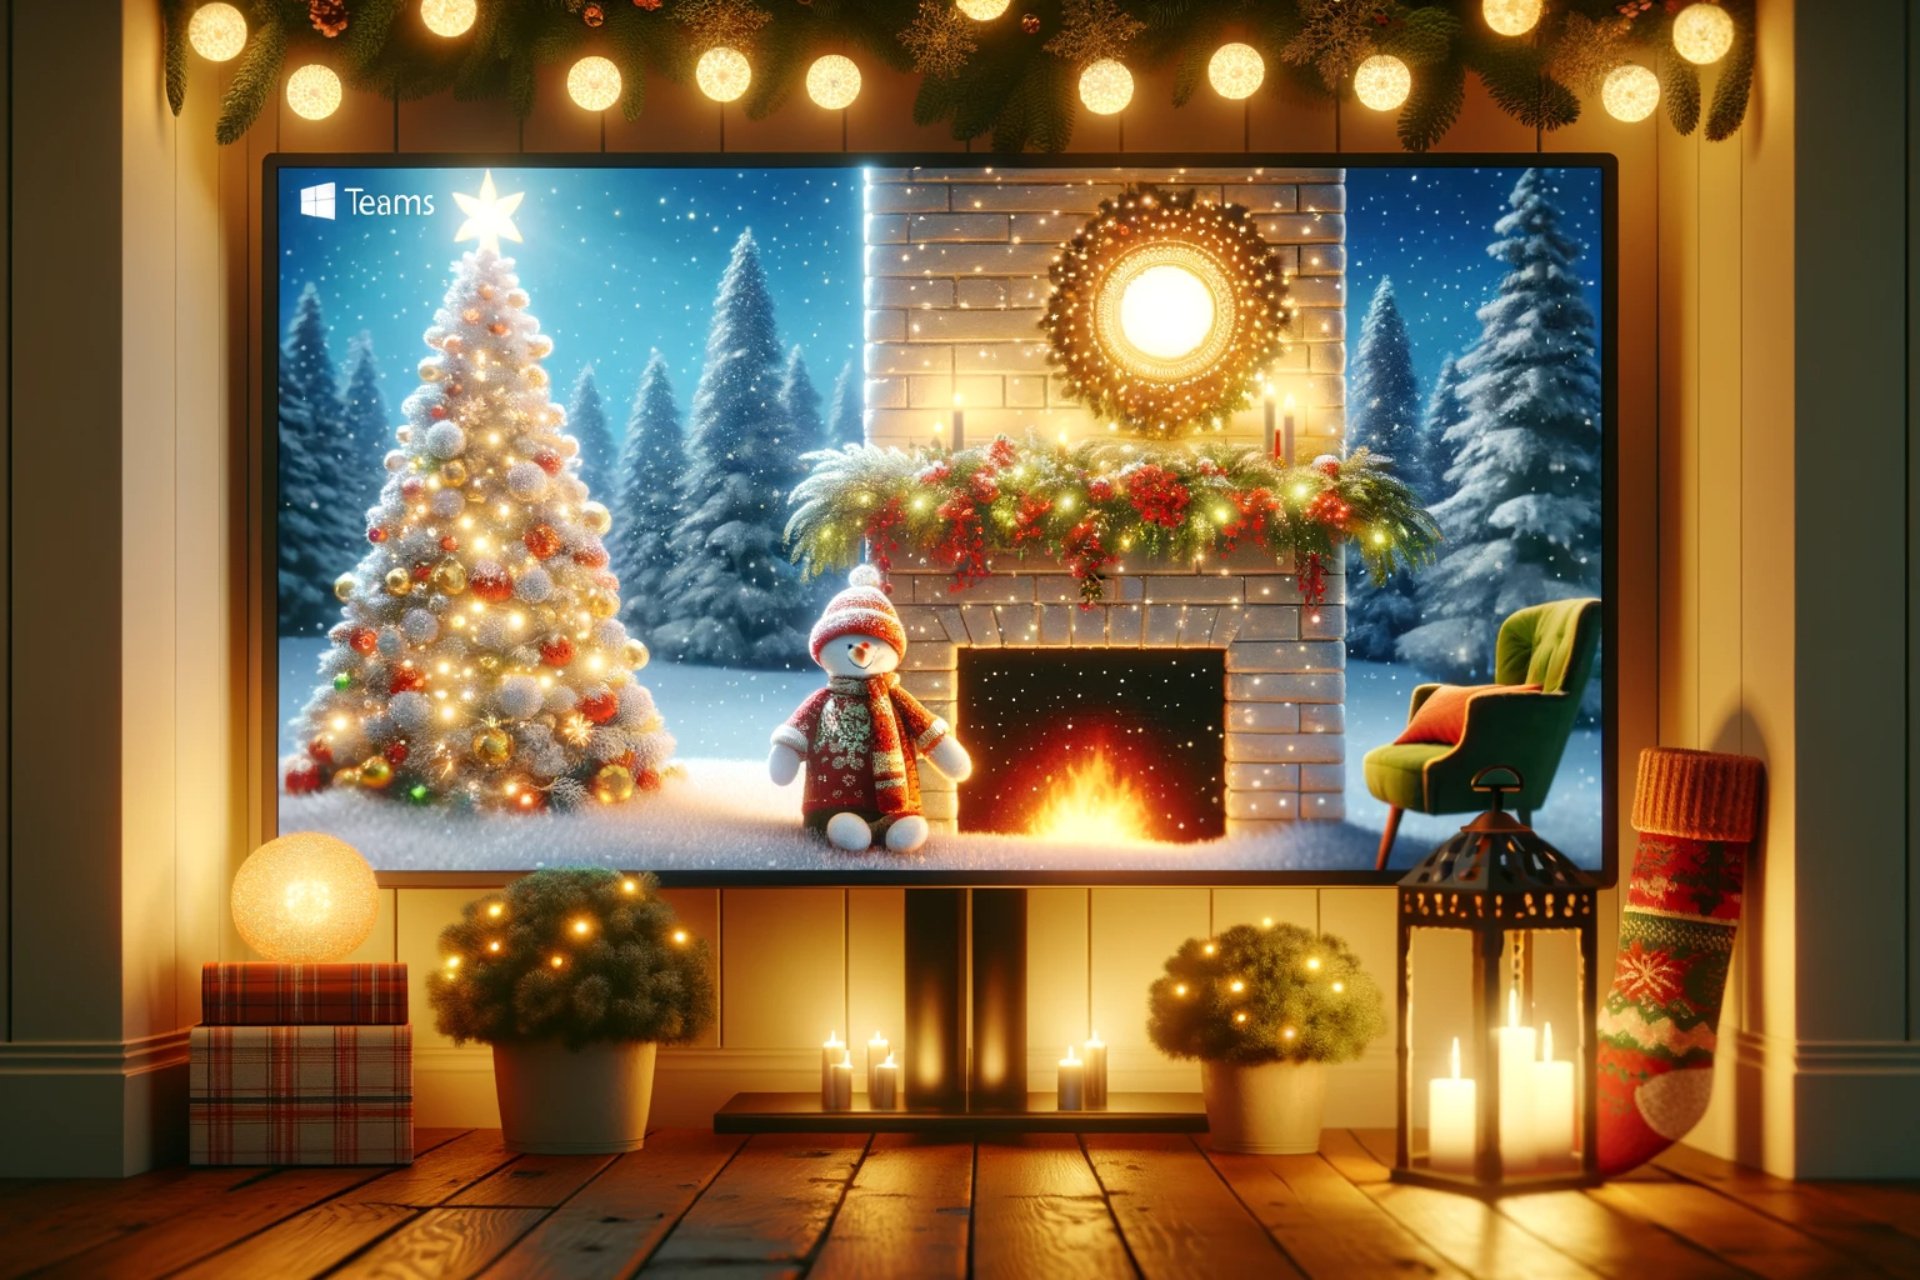 85 Festive Christmas Zoom Backgrounds - Free Download - The Bash